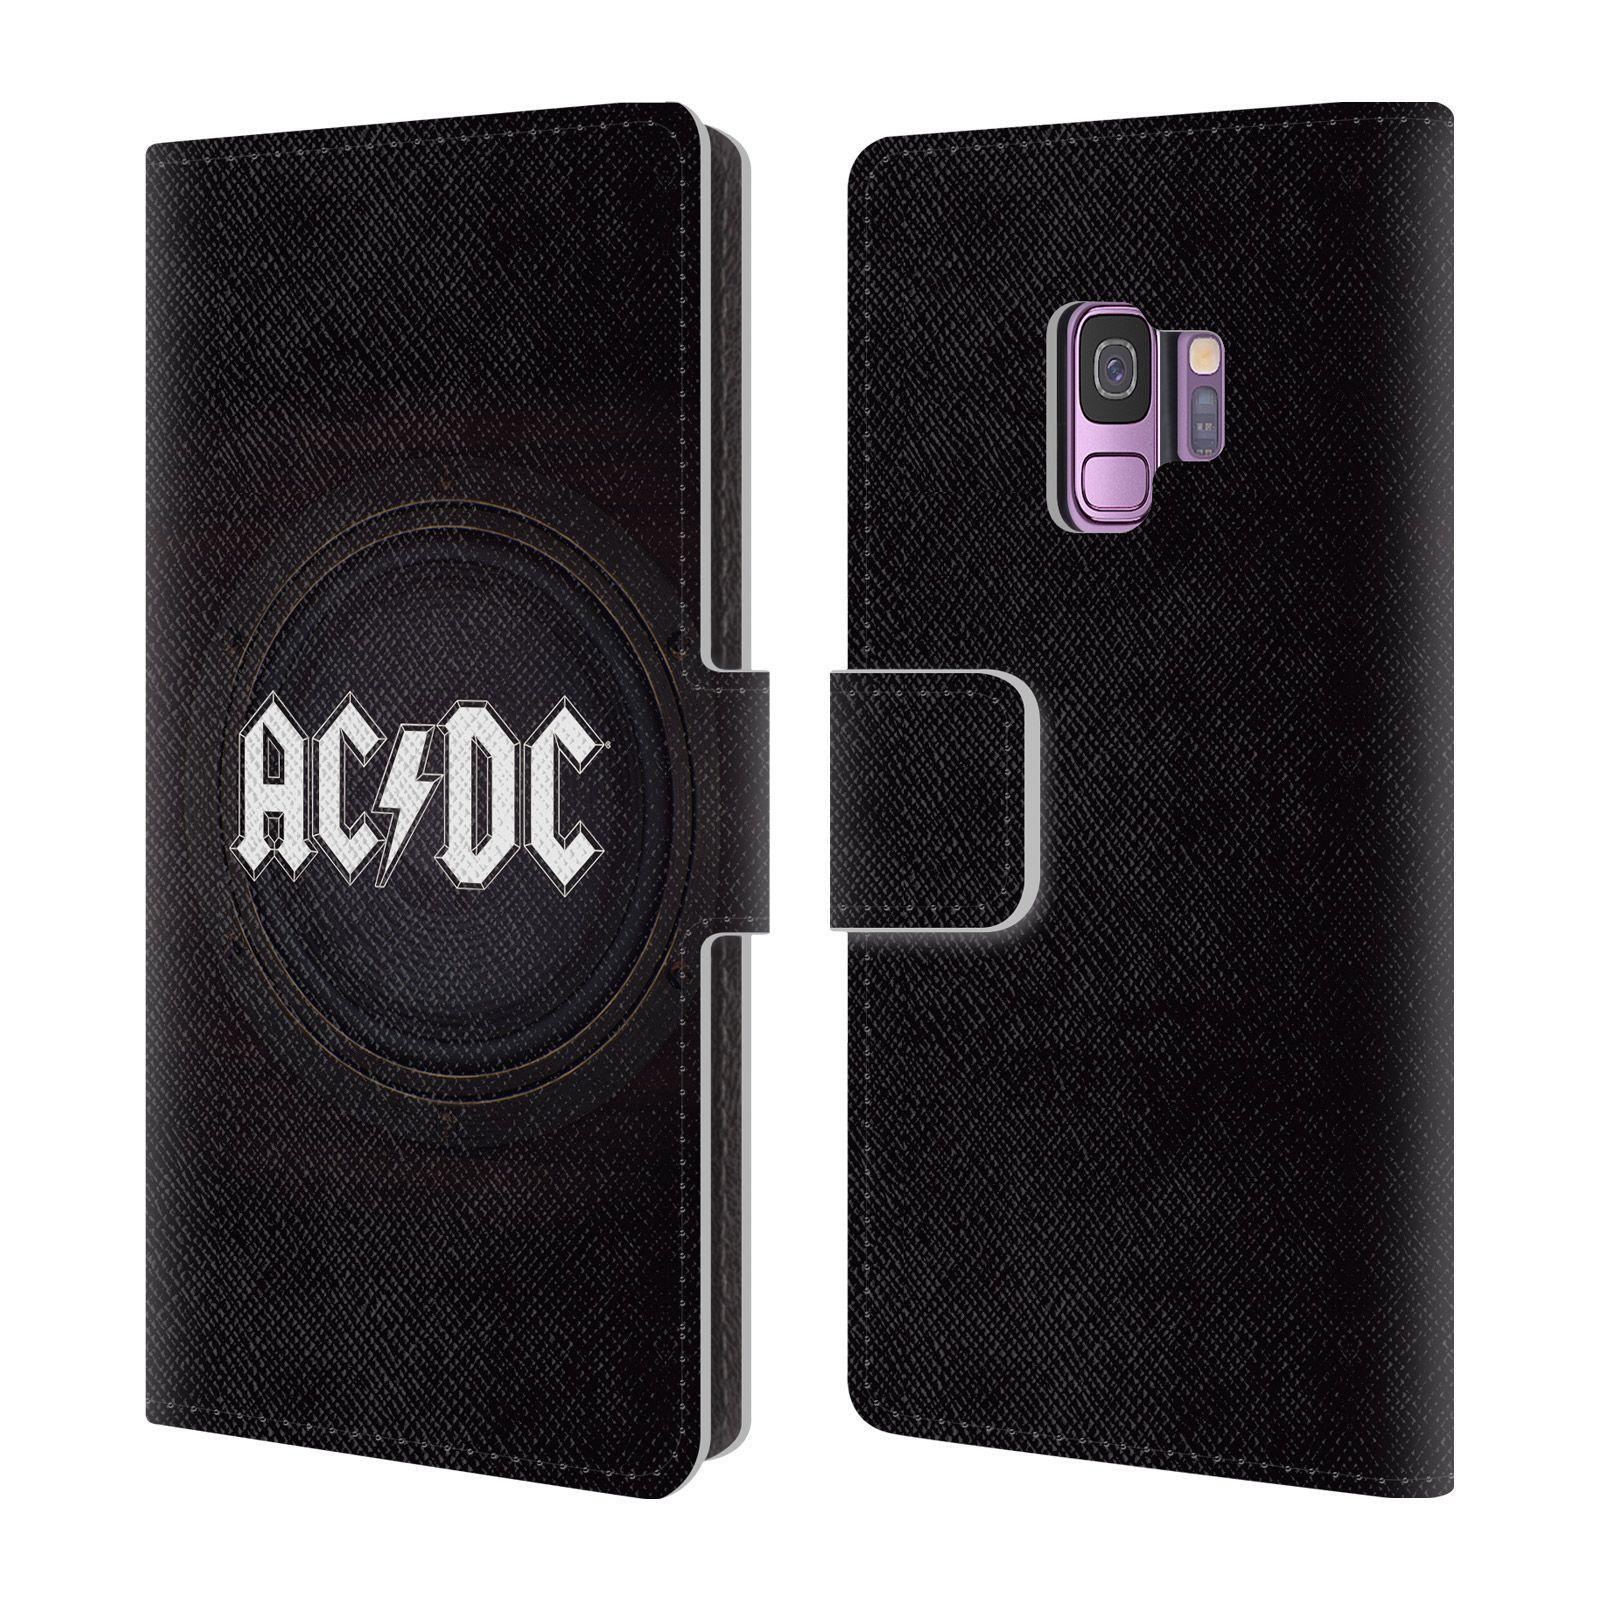 Official AC DC Logo - OFFICIAL AC/DC ACDC LOGO LEATHER BOOK WALLET CASE COVER FOR SAMSUNG ...